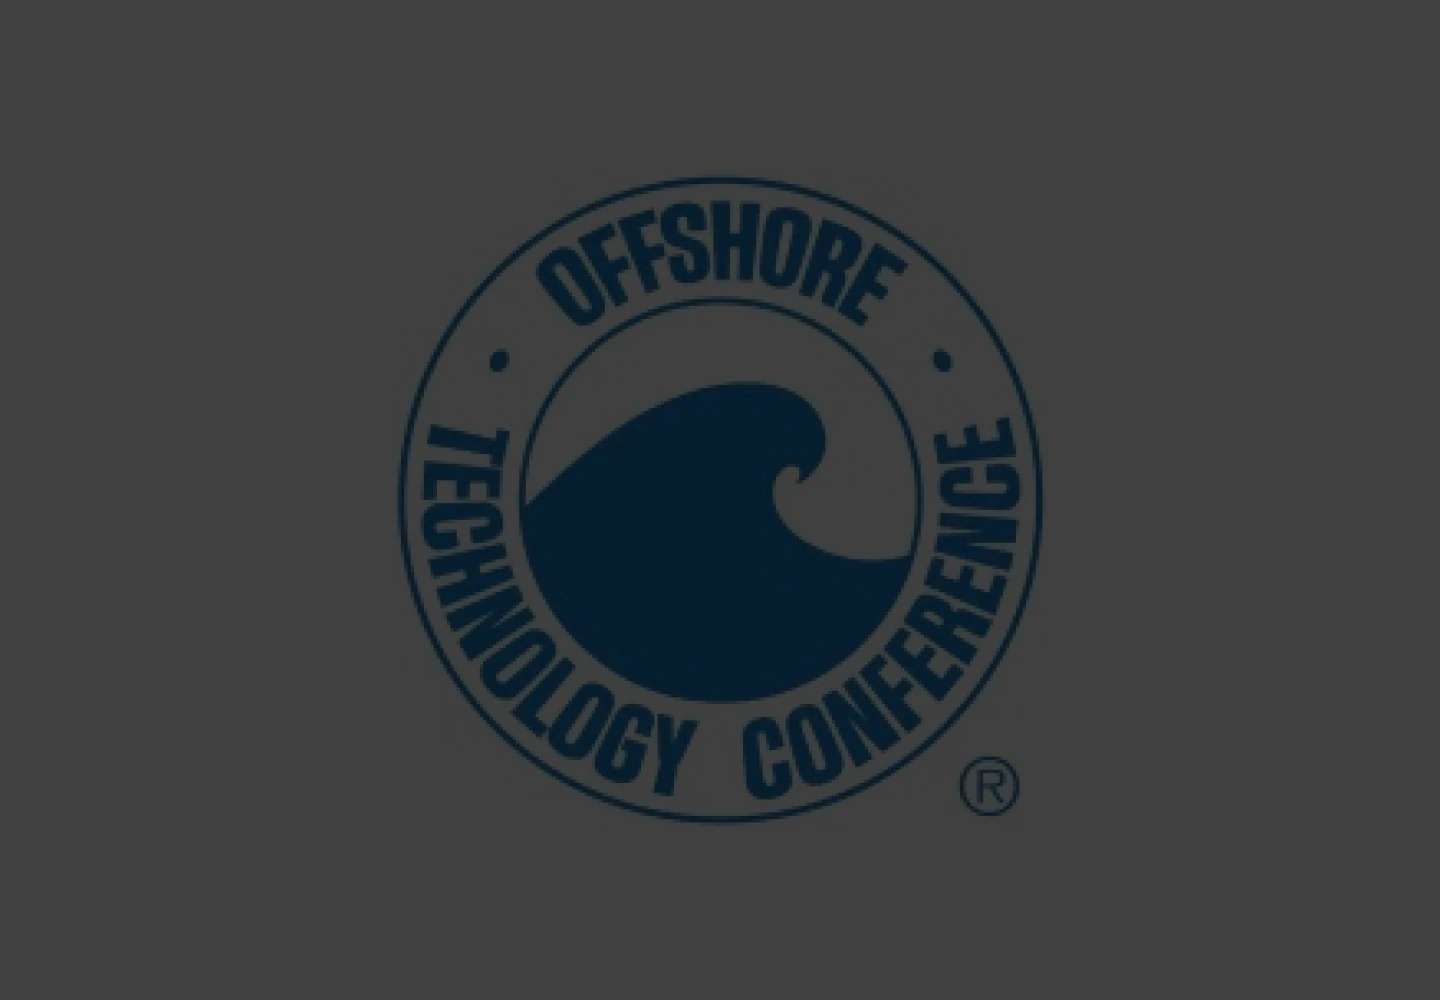 Logo of the Offshore Technology Conference (OTC).